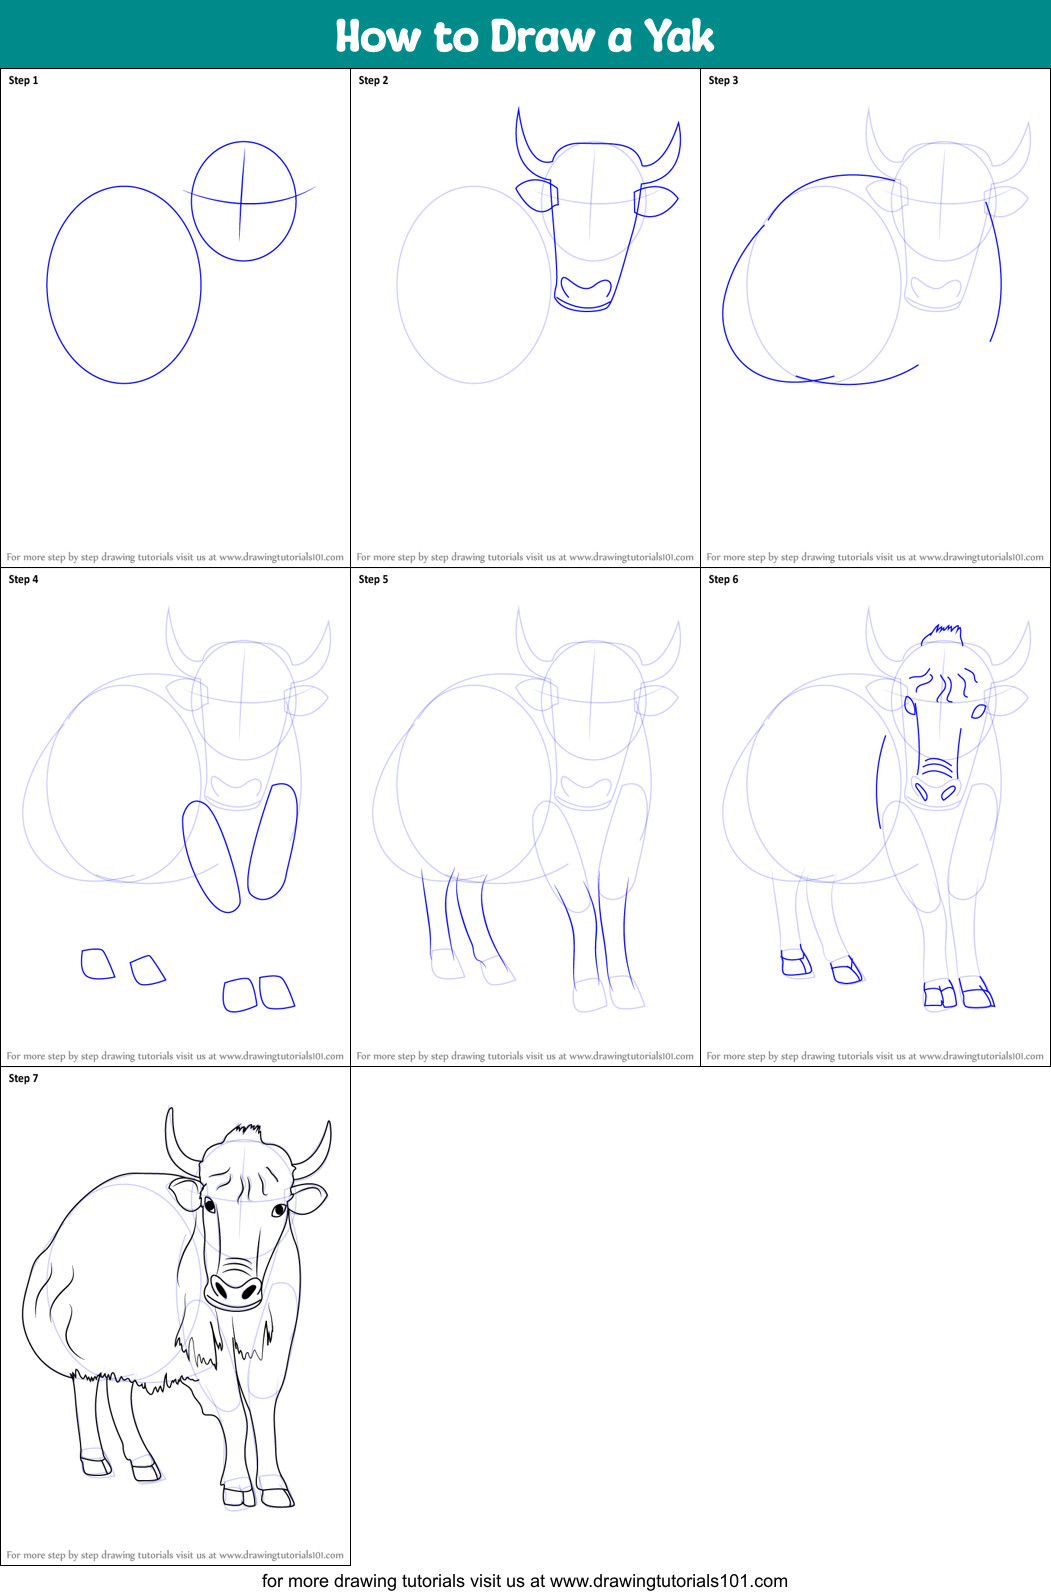 How to Draw a Yak printable step by step drawing sheet